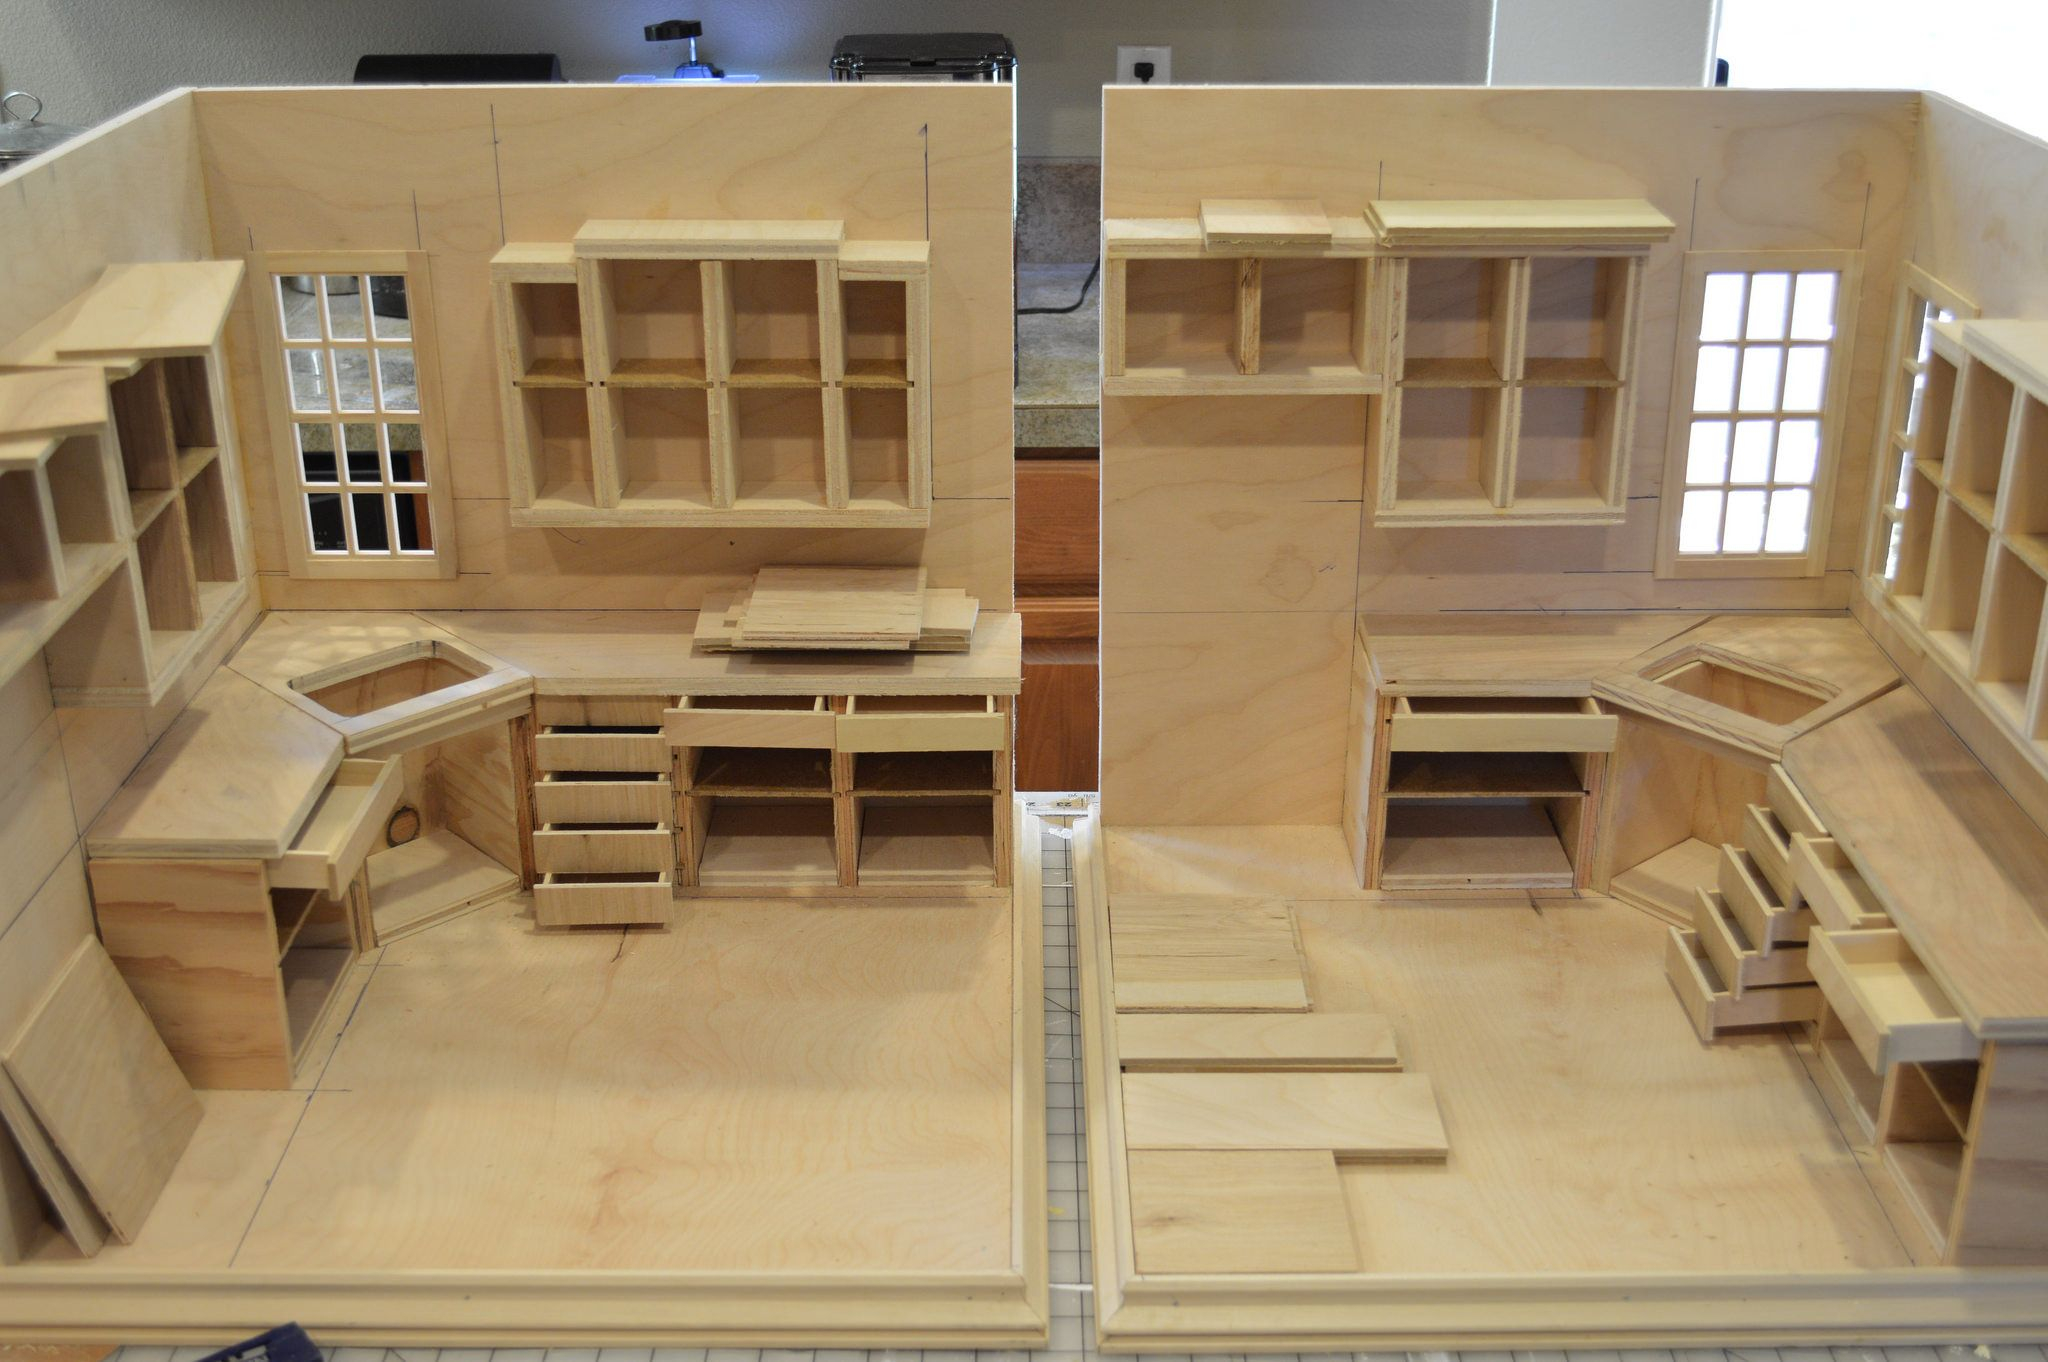 1/6 Scale Kitchen Project (With Images) | Dollhouse regarding 1 6 Scale Dollhouse Furniture